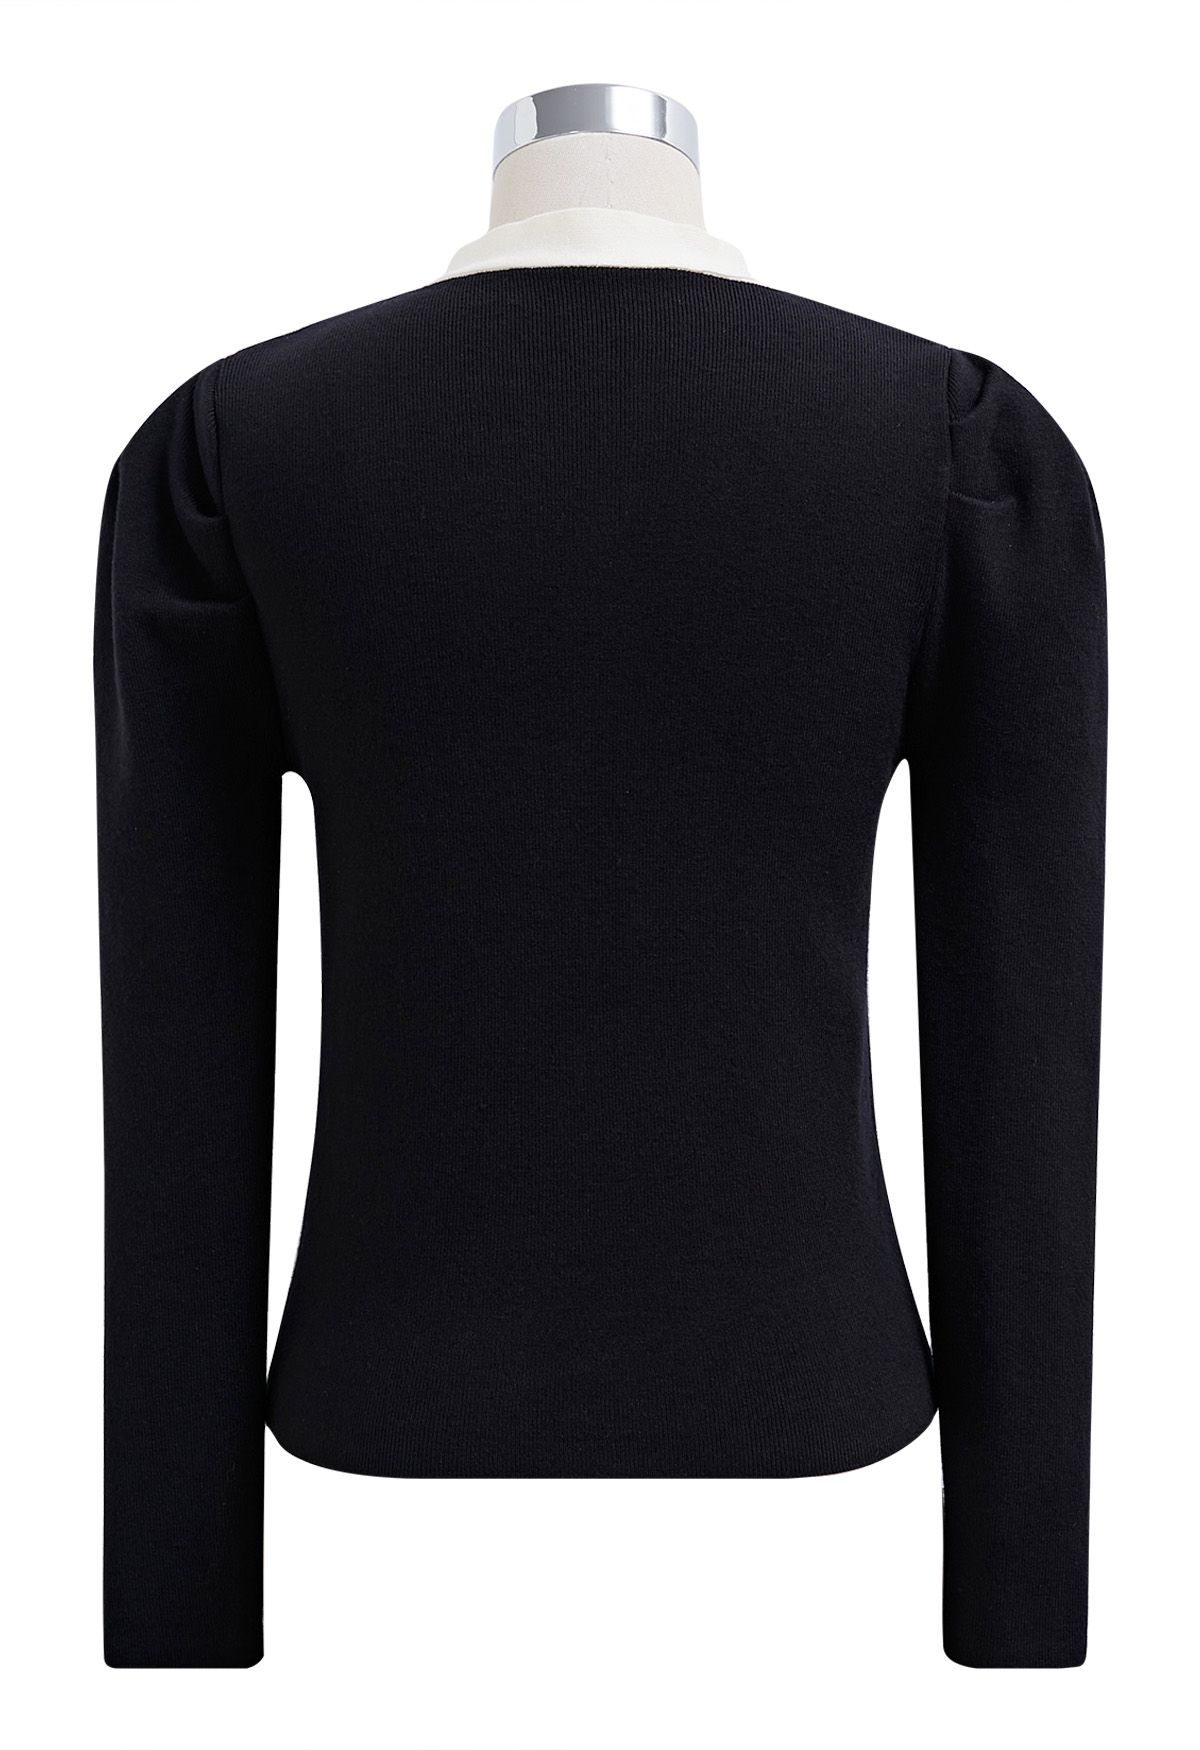 Gigot Sleeve Ribbon Adorned Knit Top in Black - Retro, Indie and Unique ...